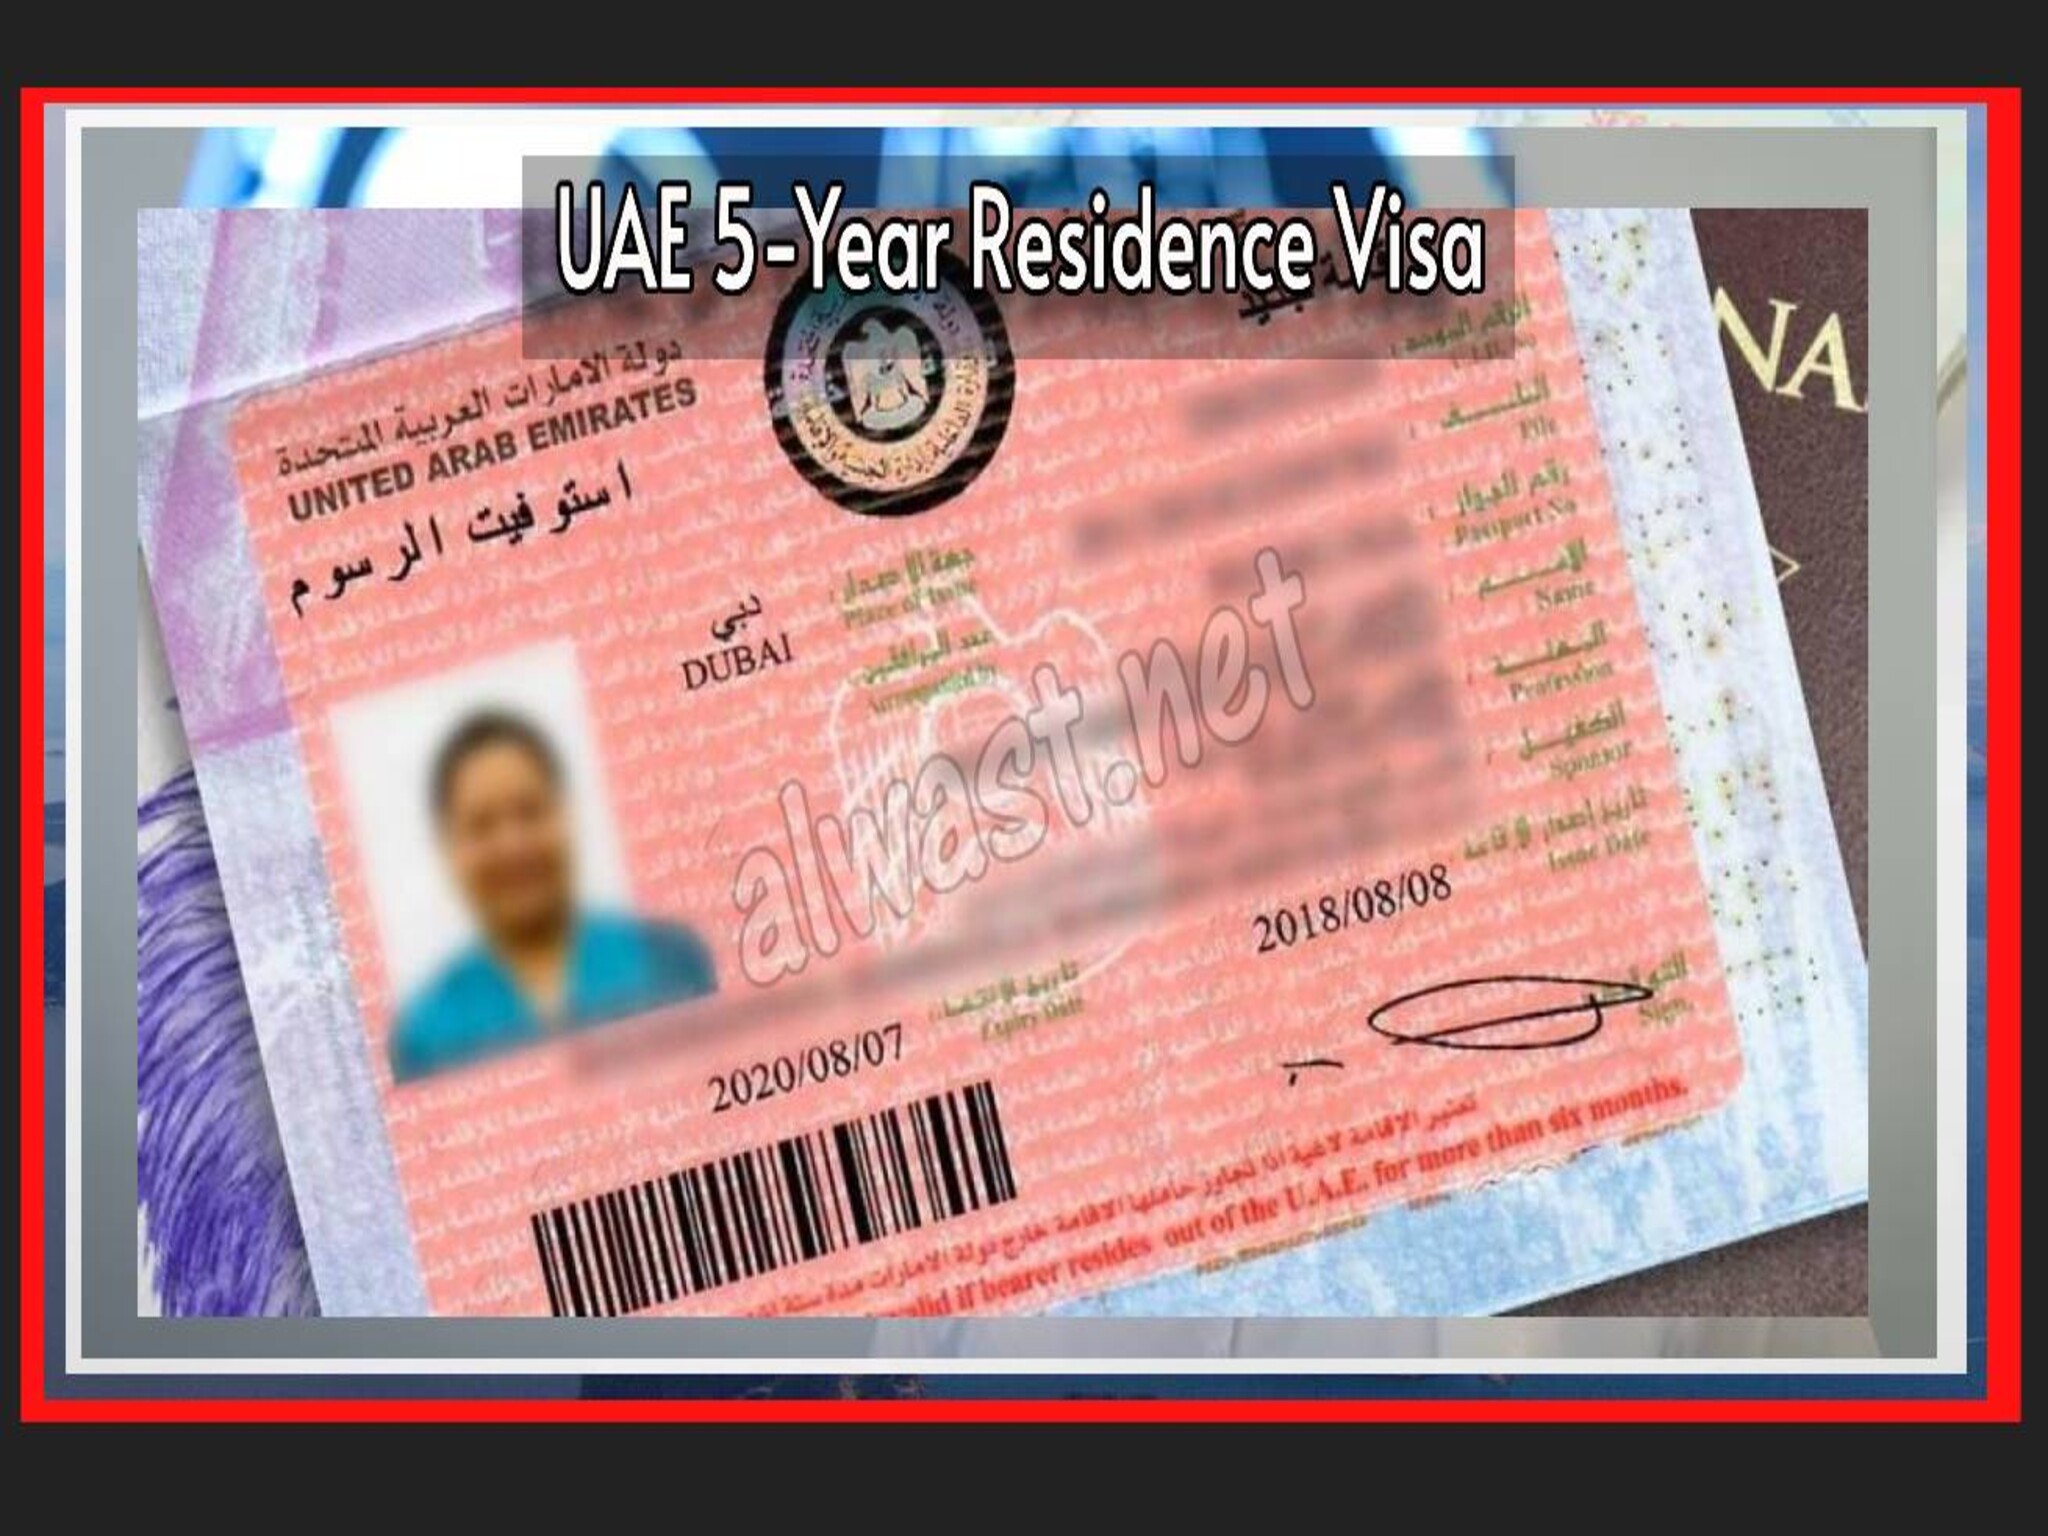 UAE 5-Year Residence Visa: A Comprehensive Guide to Costs and Benefits